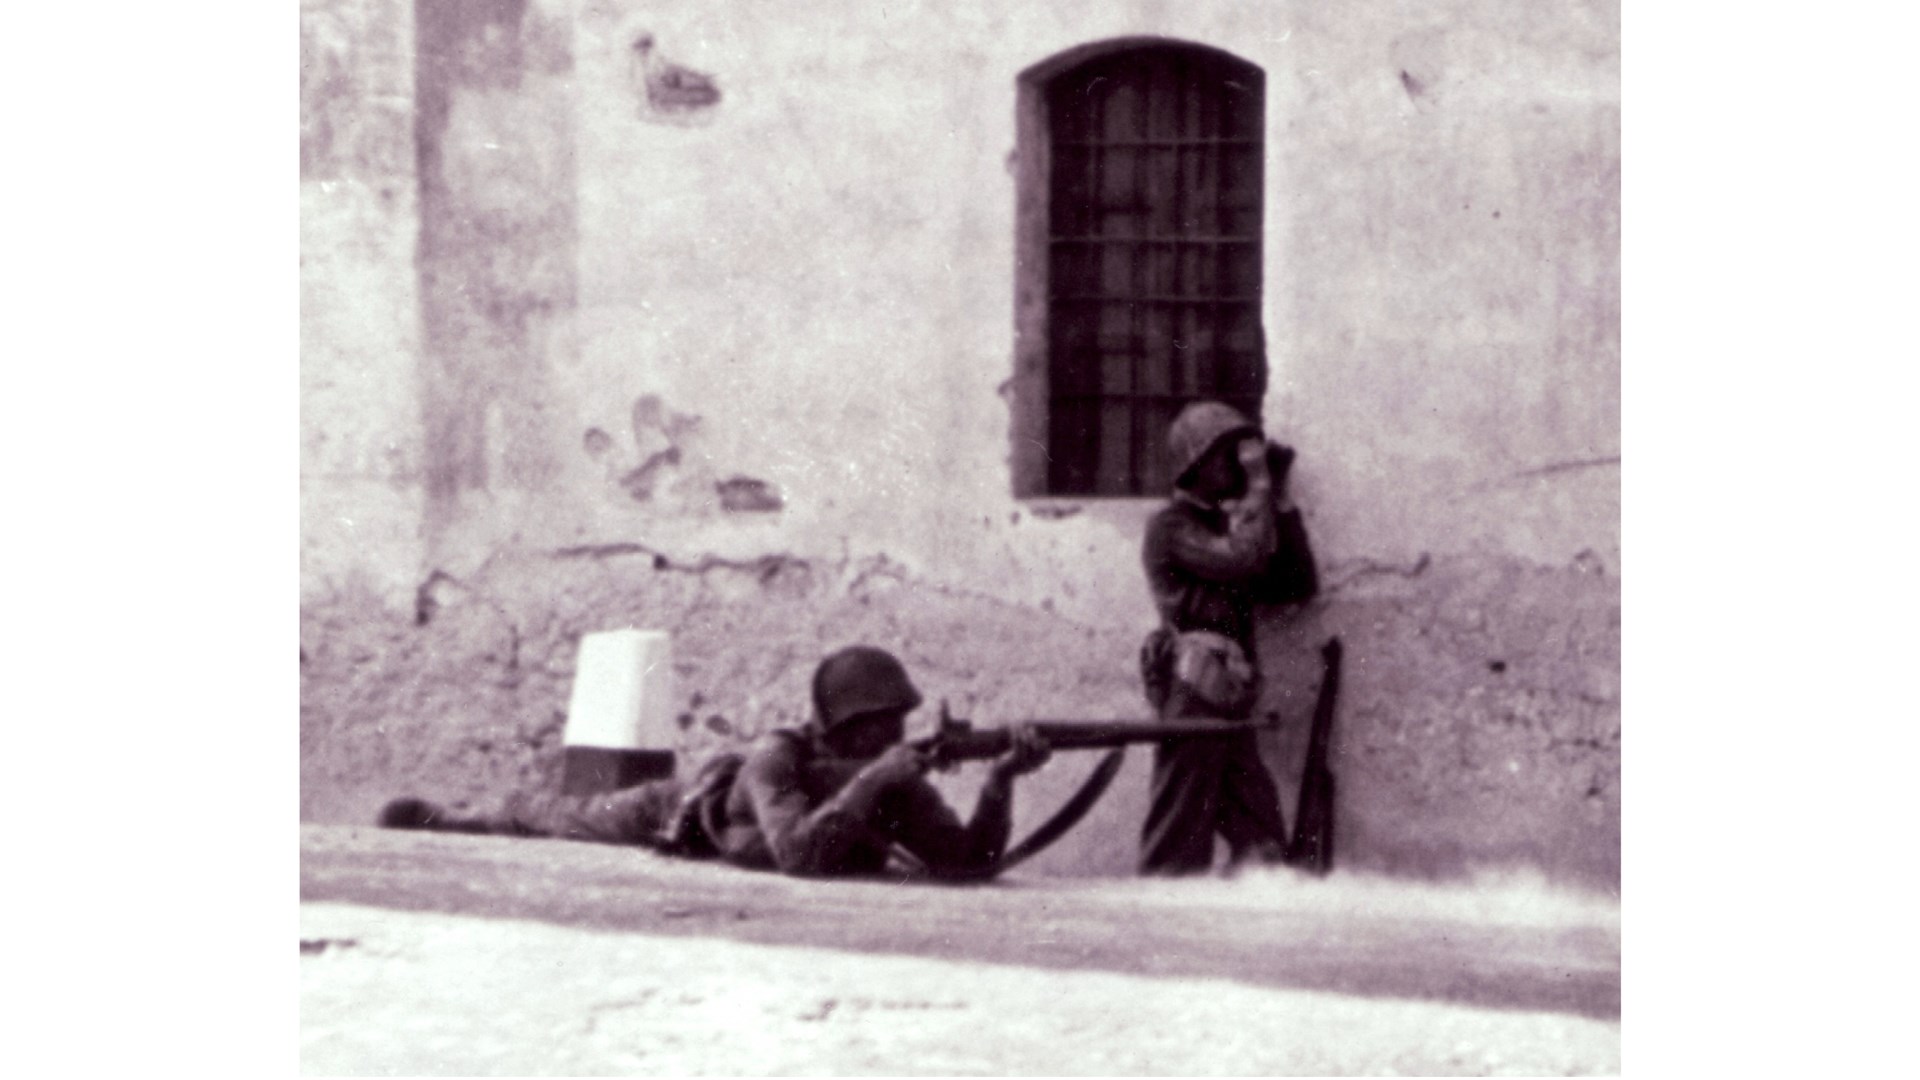 A rare appearance of the .30 caliber M1917 “Enfield” rifle in combat during WWII. This US artilleryman takes aim on the streets of a Sicilian town. NARA